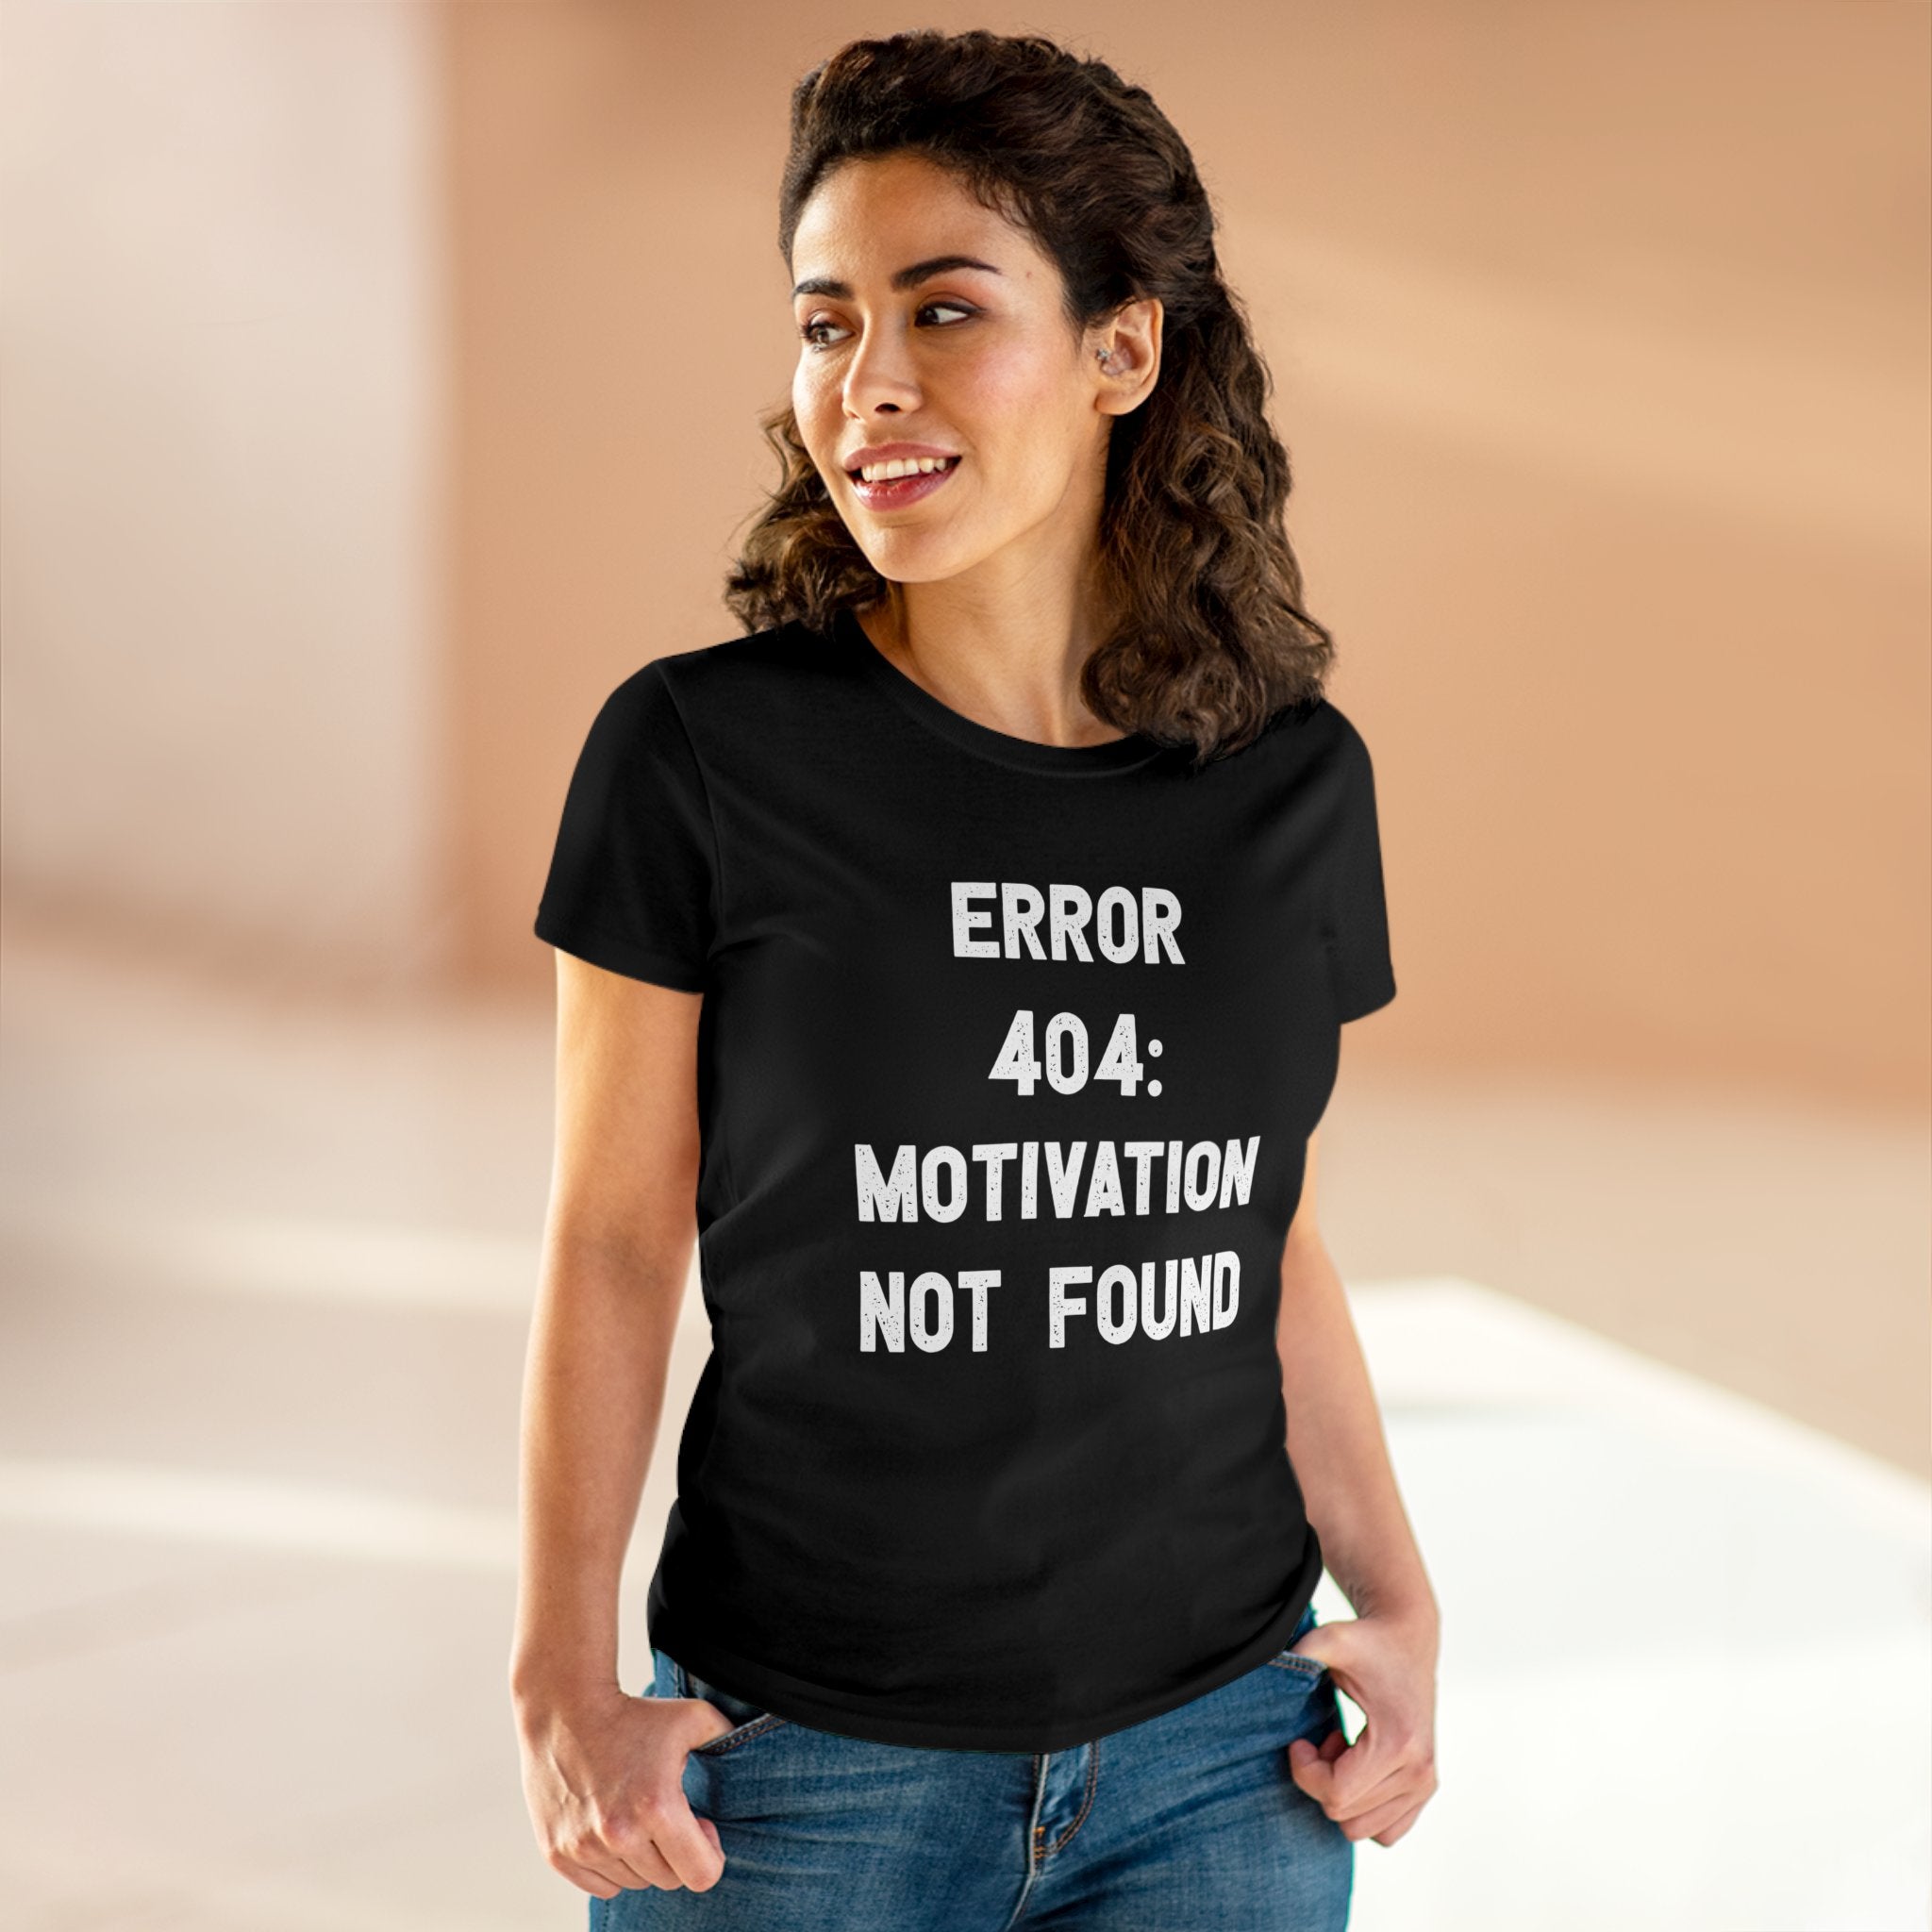 A woman is standing indoors, wearing a black "Error 404: Motivation not found - Women's Tee" that reads "ERROR 404: MOTIVATION NOT FOUND" in white text. Made of pre-shrunk cotton, it features a semi-fitted silhouette. She is smiling and looking to her right.


